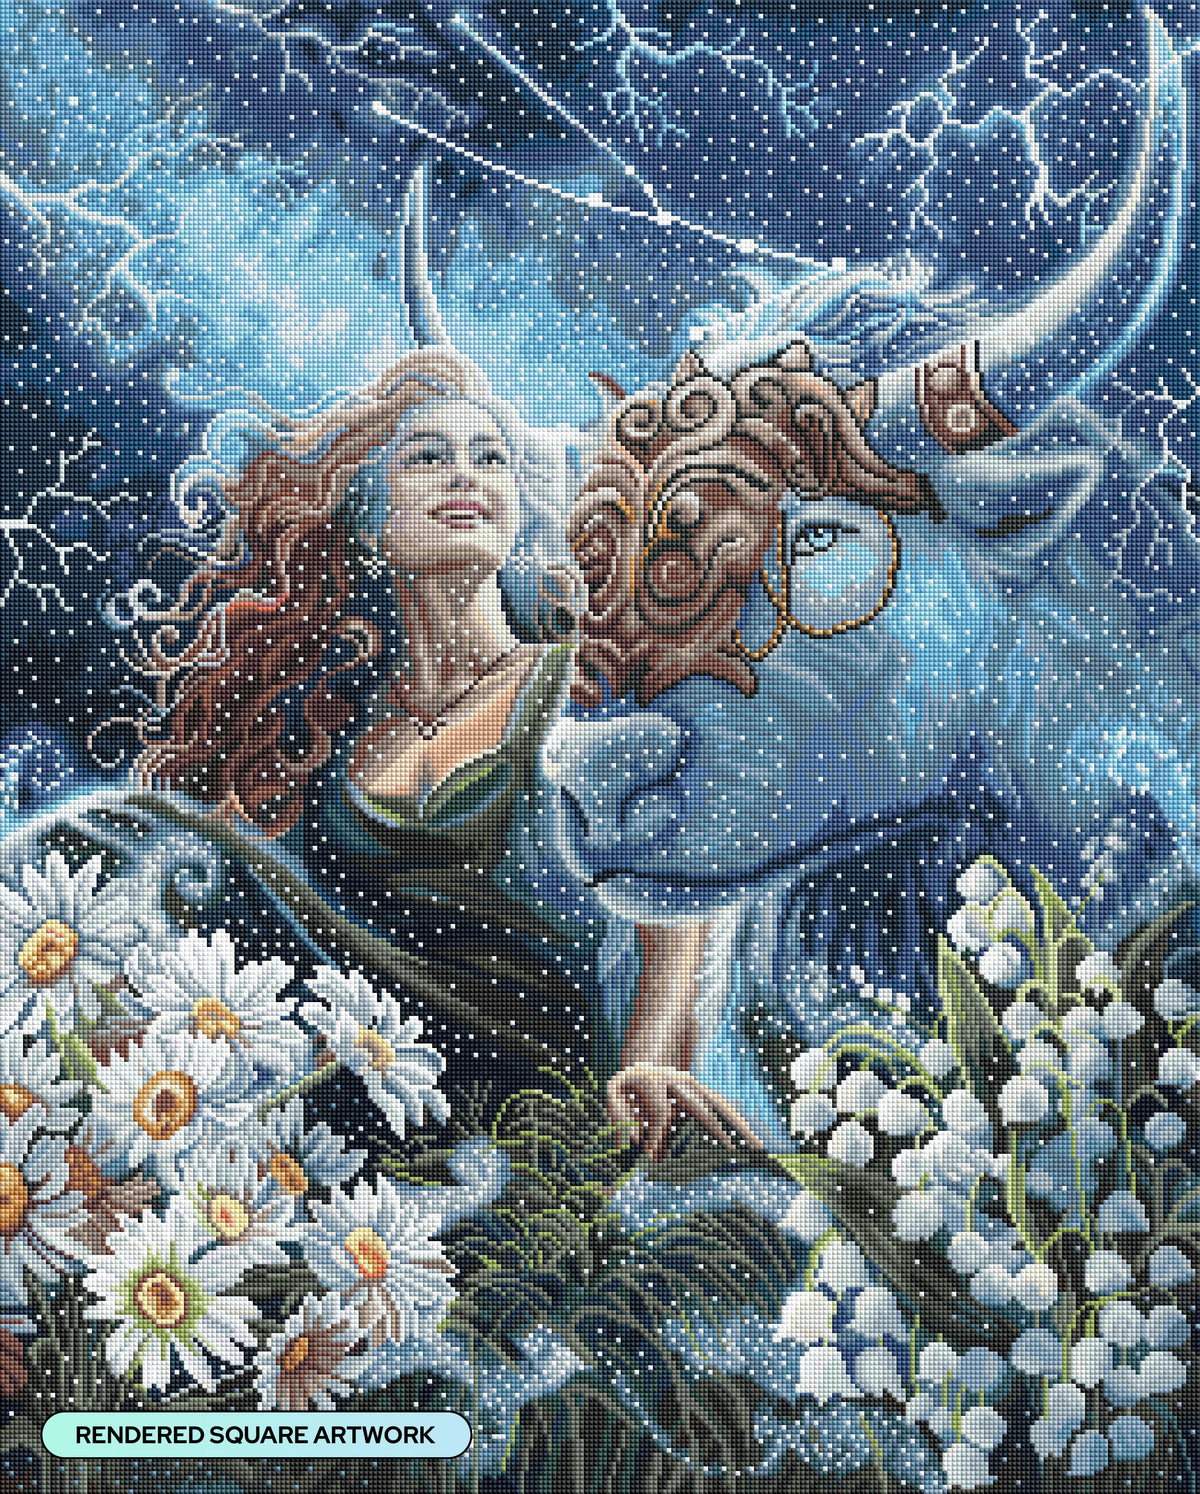 Diamond Painting Taurus - DD 25.6" x 31.9" (65cm x 81cm) / Square with 66 Colors including 3 ABs and 3 Fairy Dust Diamonds / 84,825